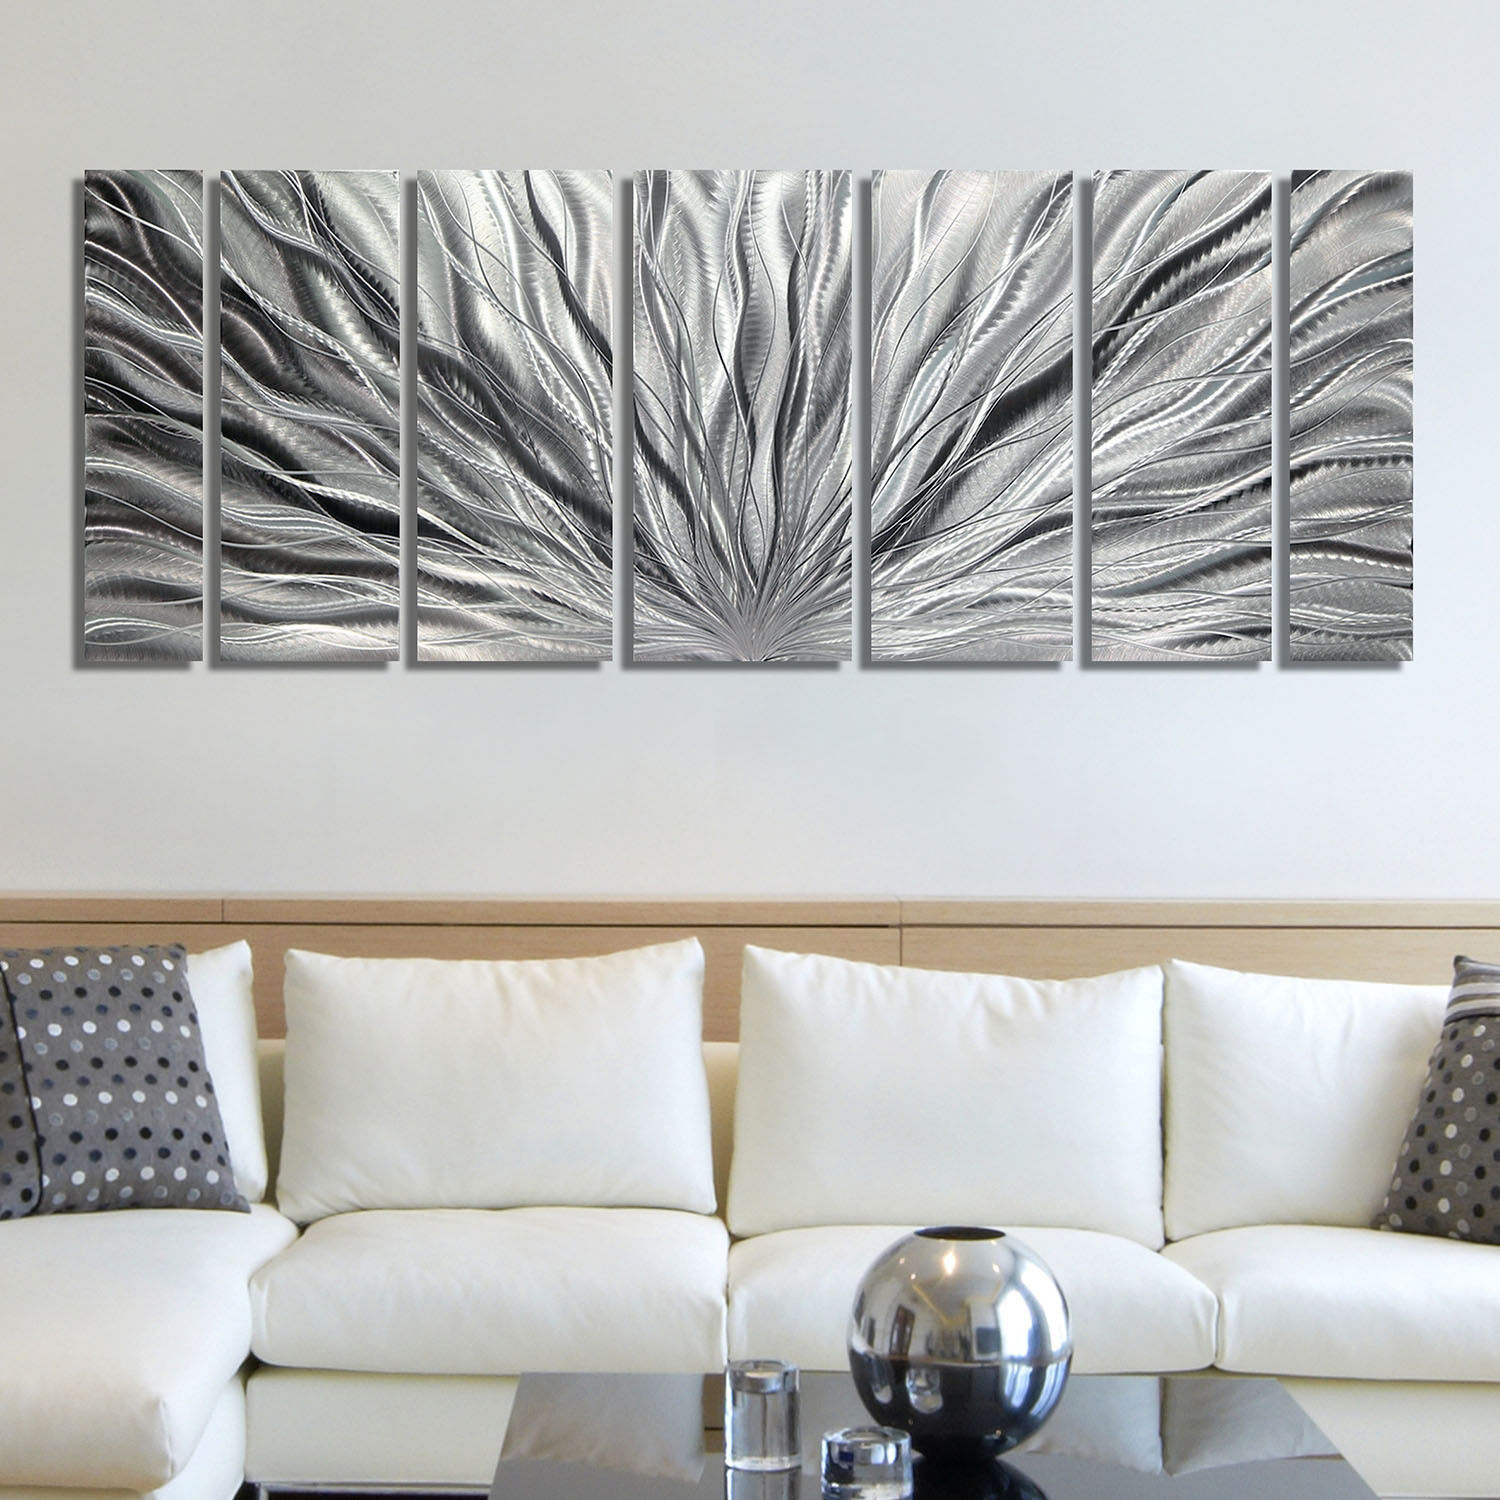 Large Silver Metal Wall Art Abstract Hanging Sculpture Decor for Indoor/Outdoor